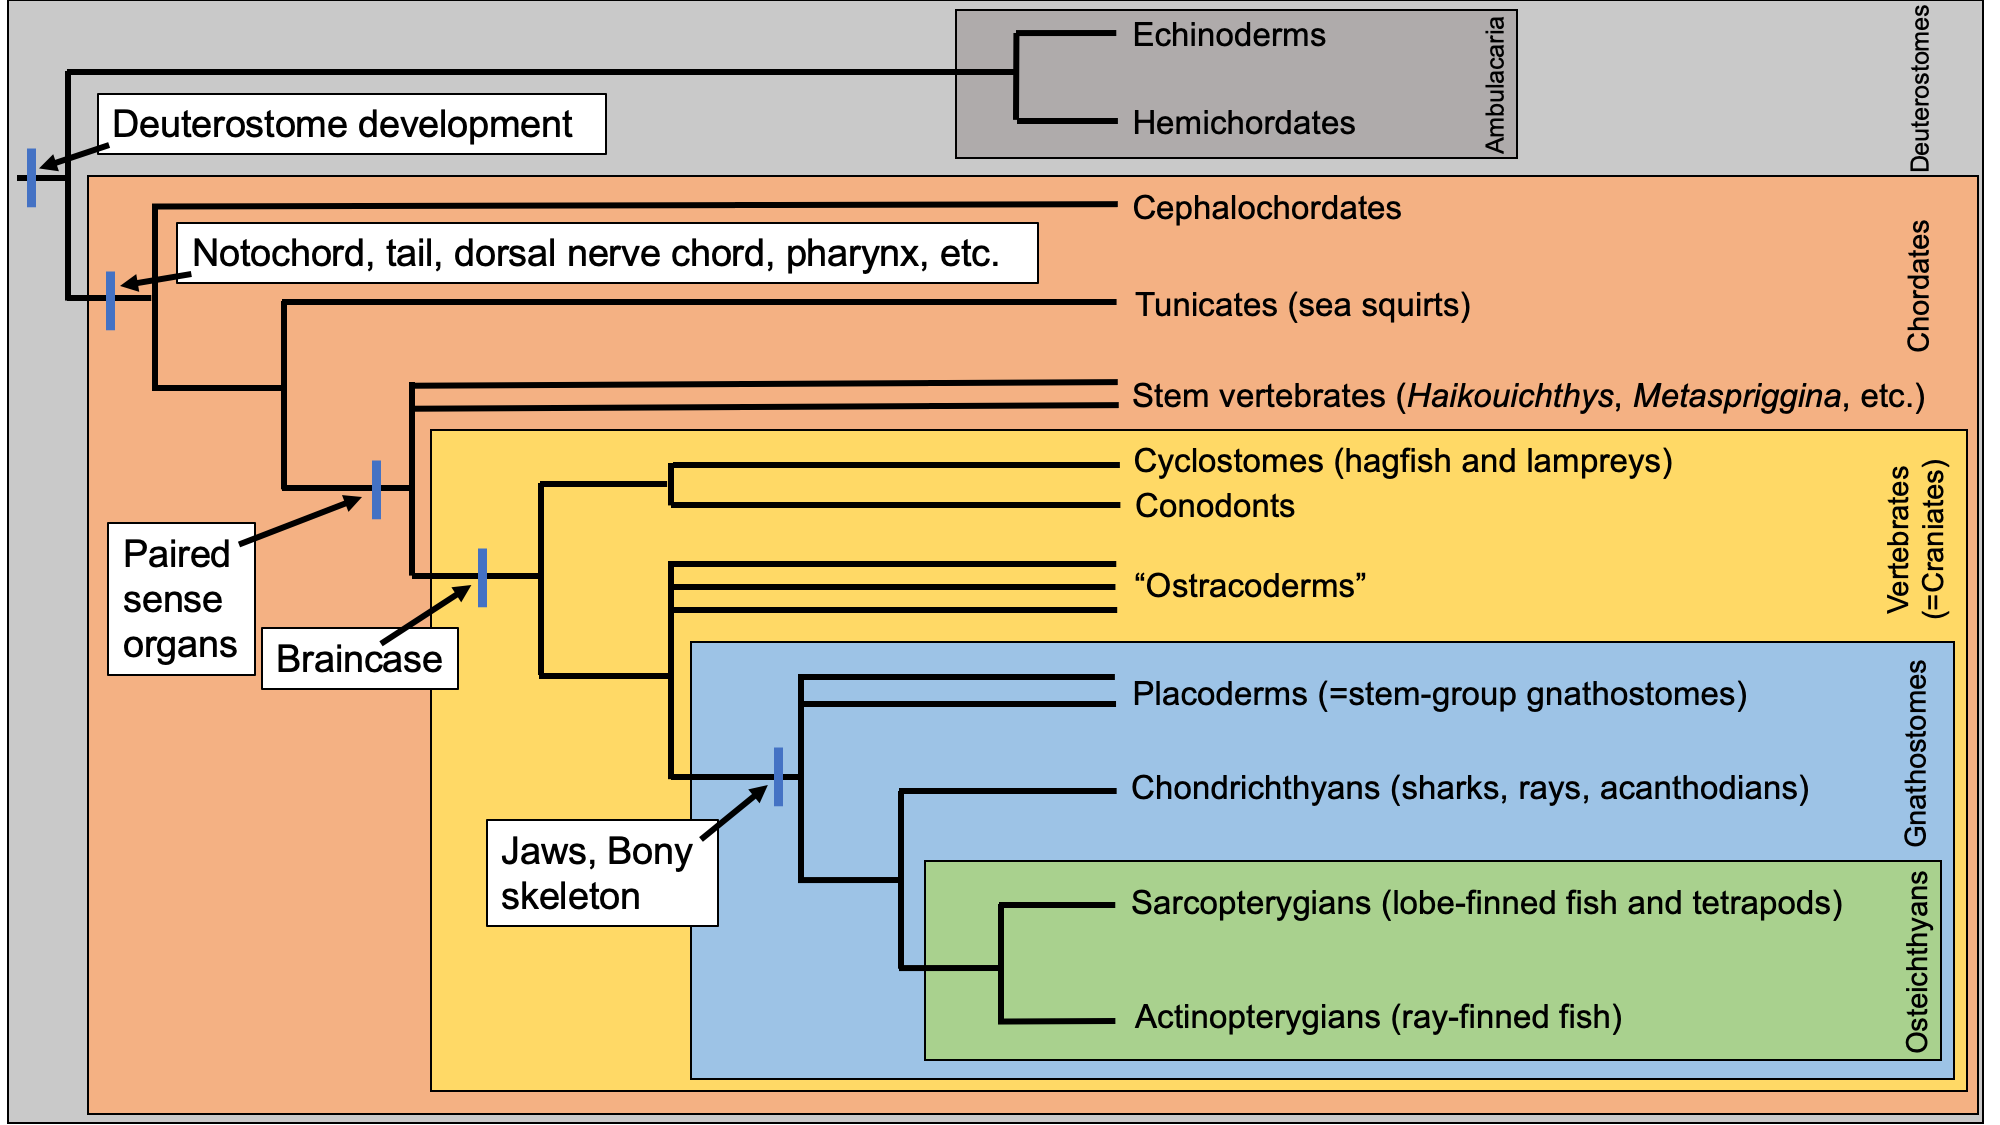 Image of a phylogenetic tree that depicts the major groups of vertebrates and the characters that define individual clades.